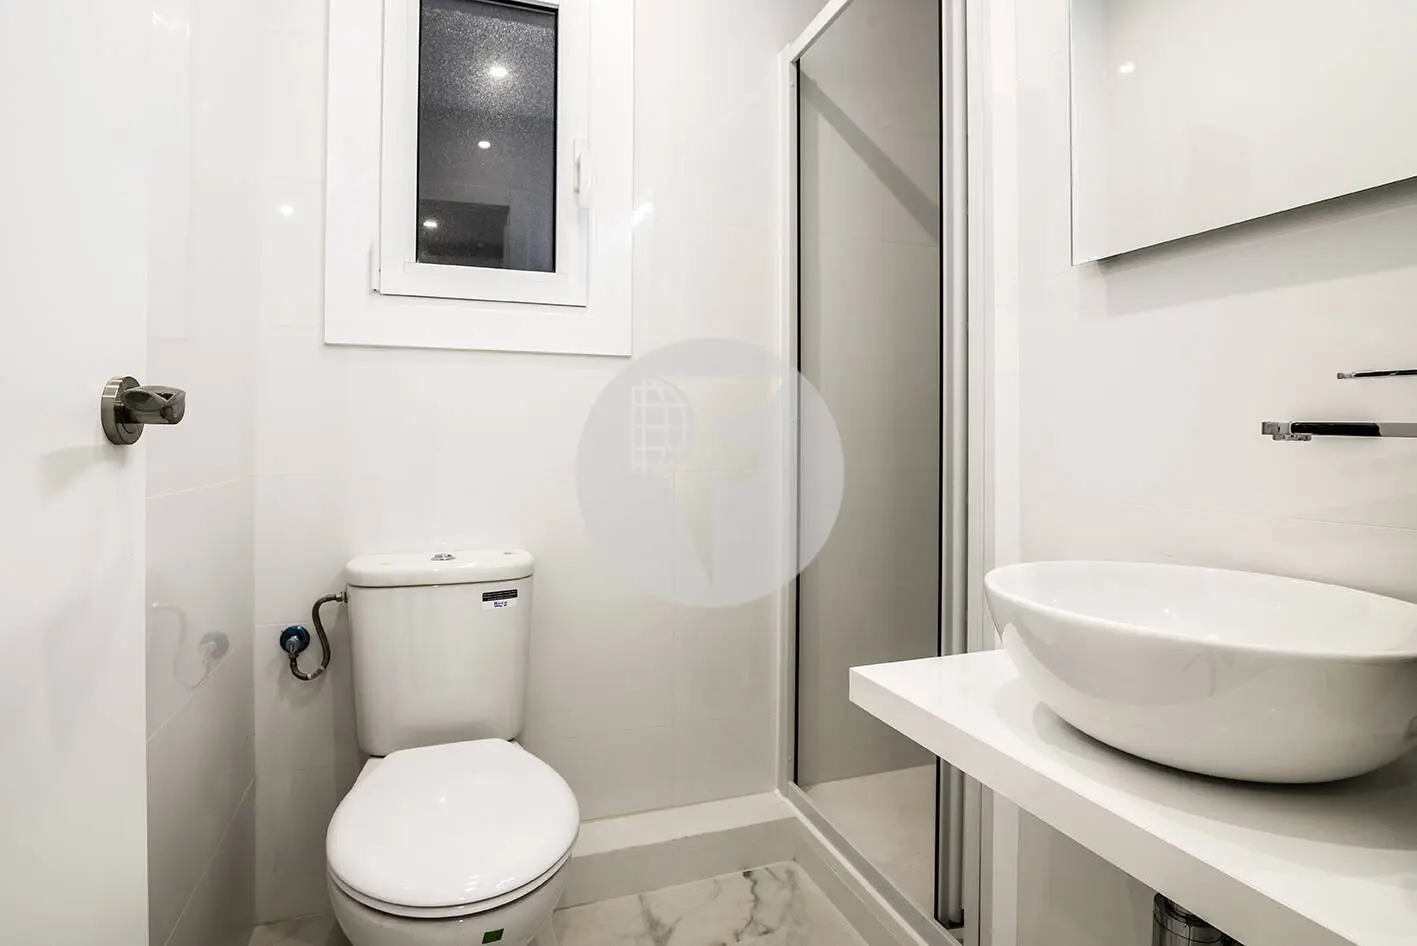 Brand new completely renovated apartment on Aragó street in the heart of El Clot in Barcelona. 26